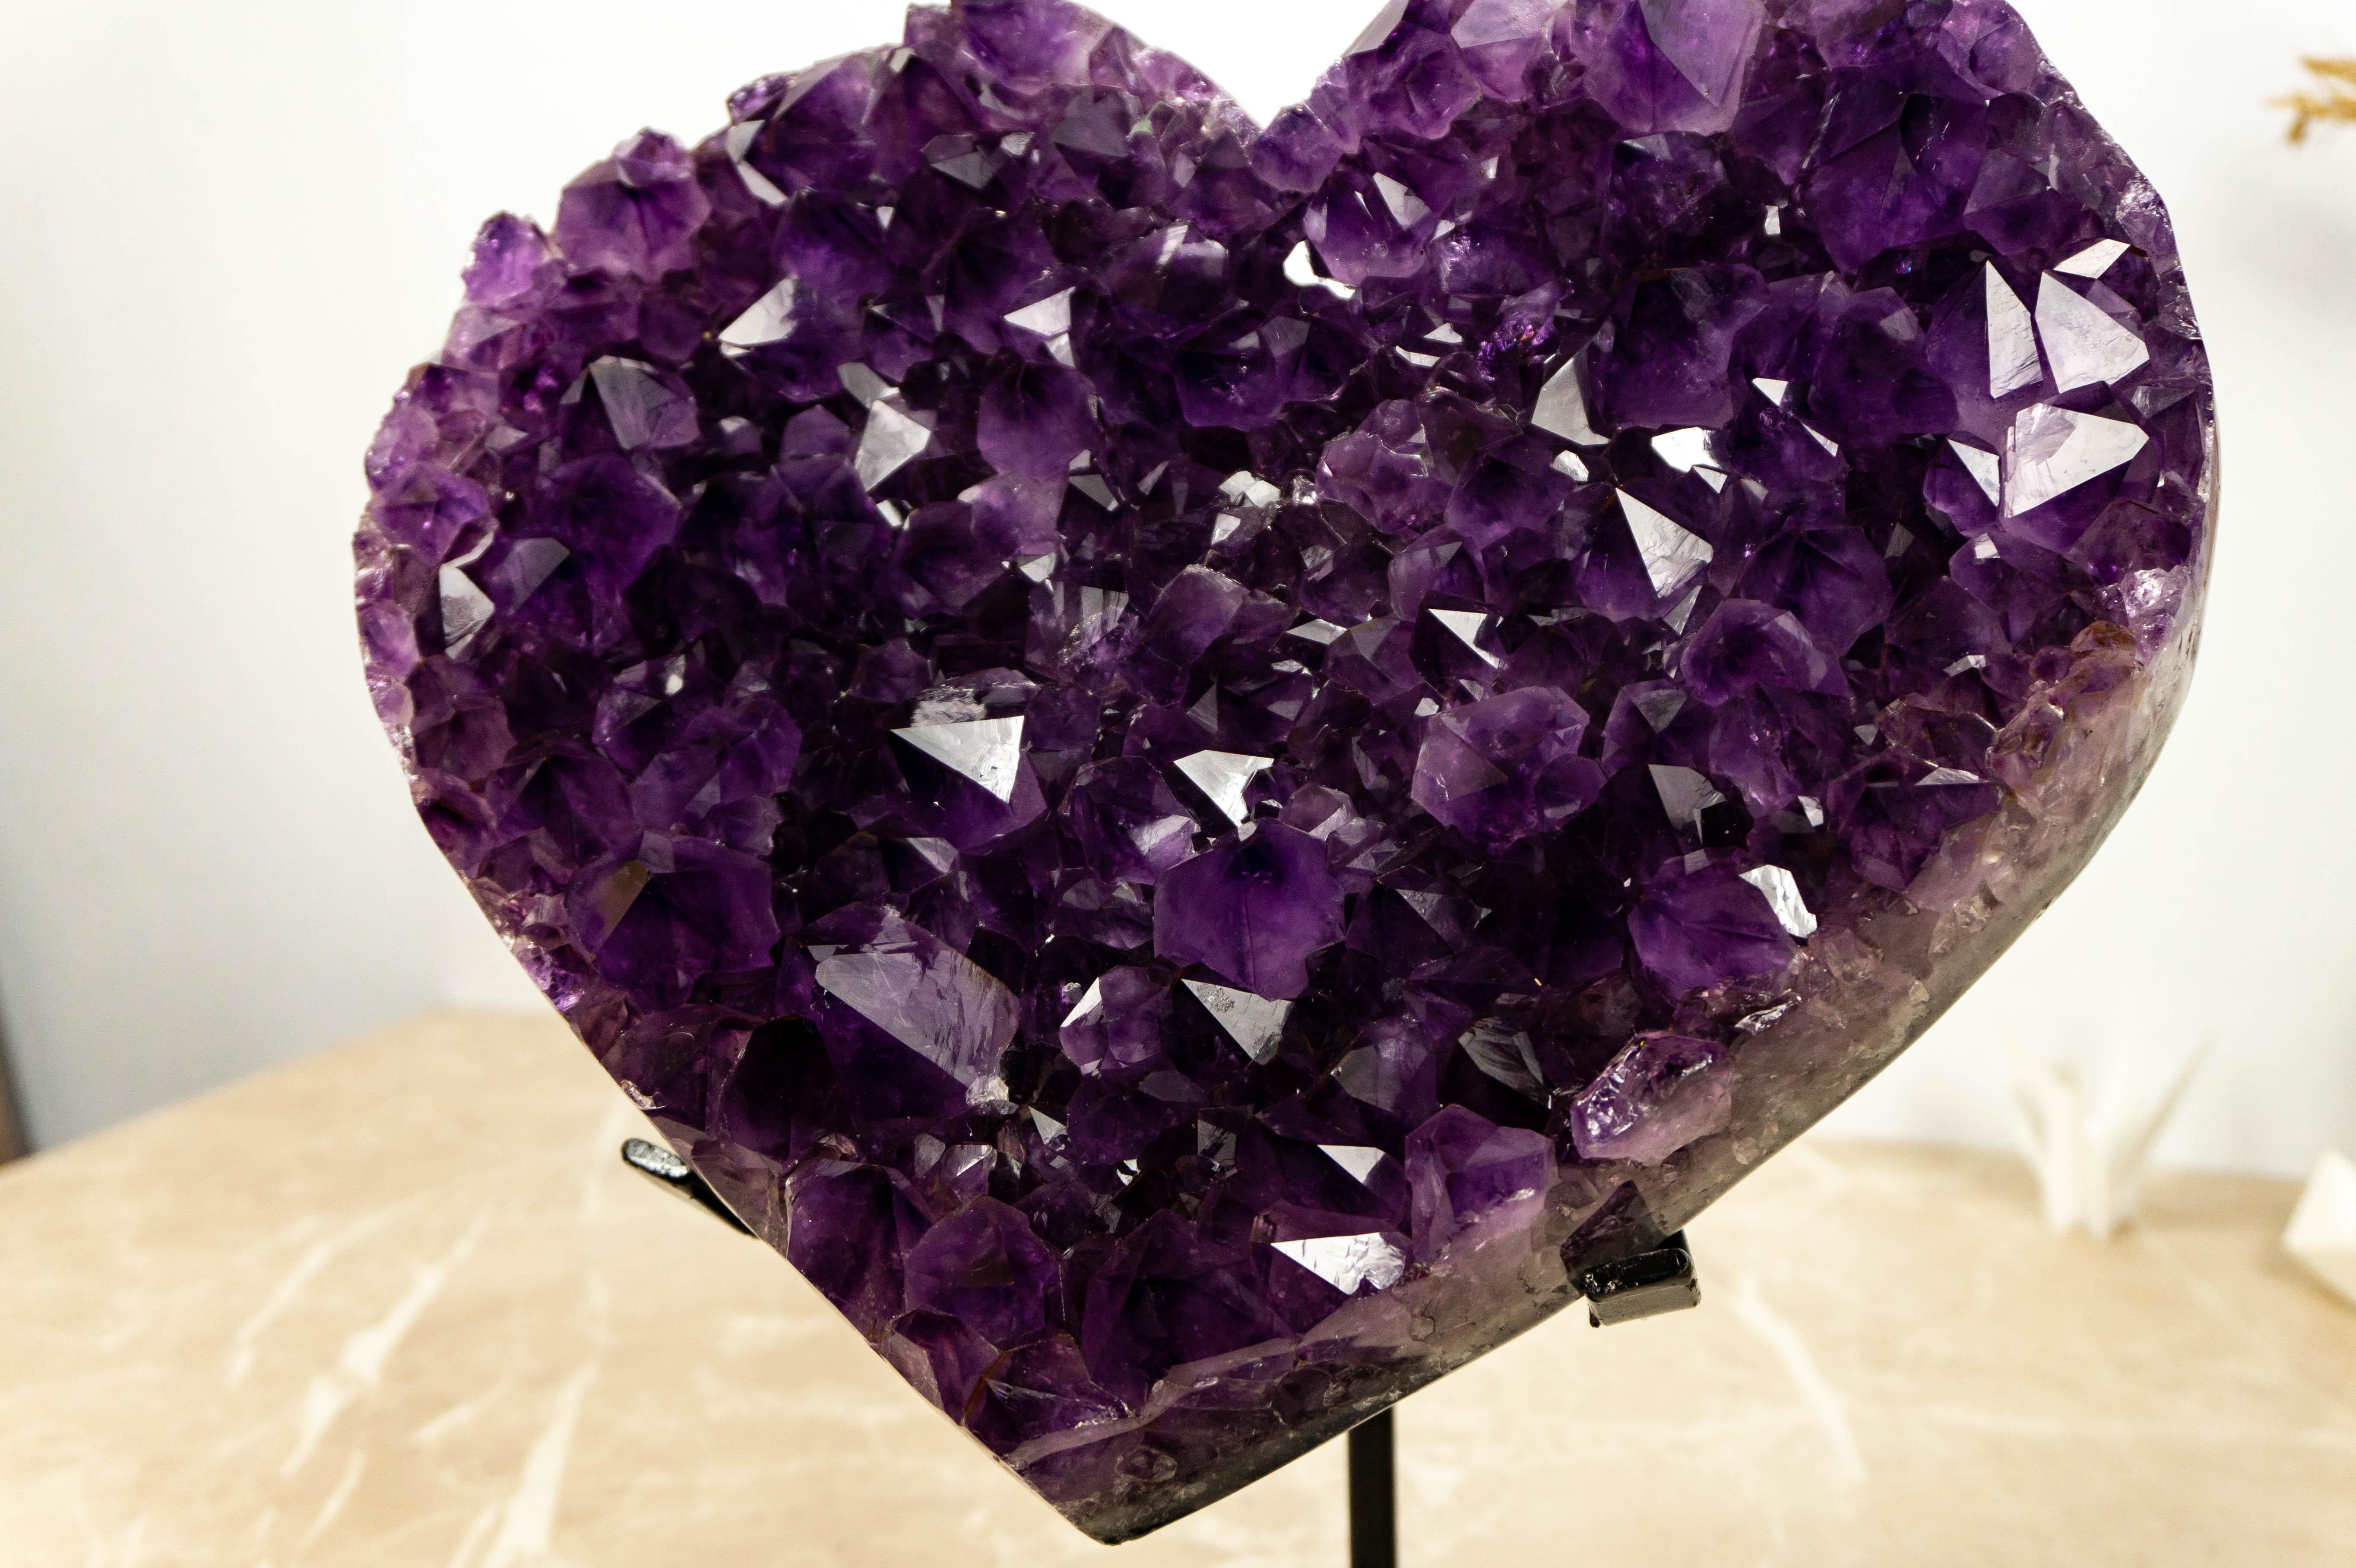 Contemporary Hand-carved Amethyst Heart featuring Large AAA Deep Purple Amethyst Druzy For Sale